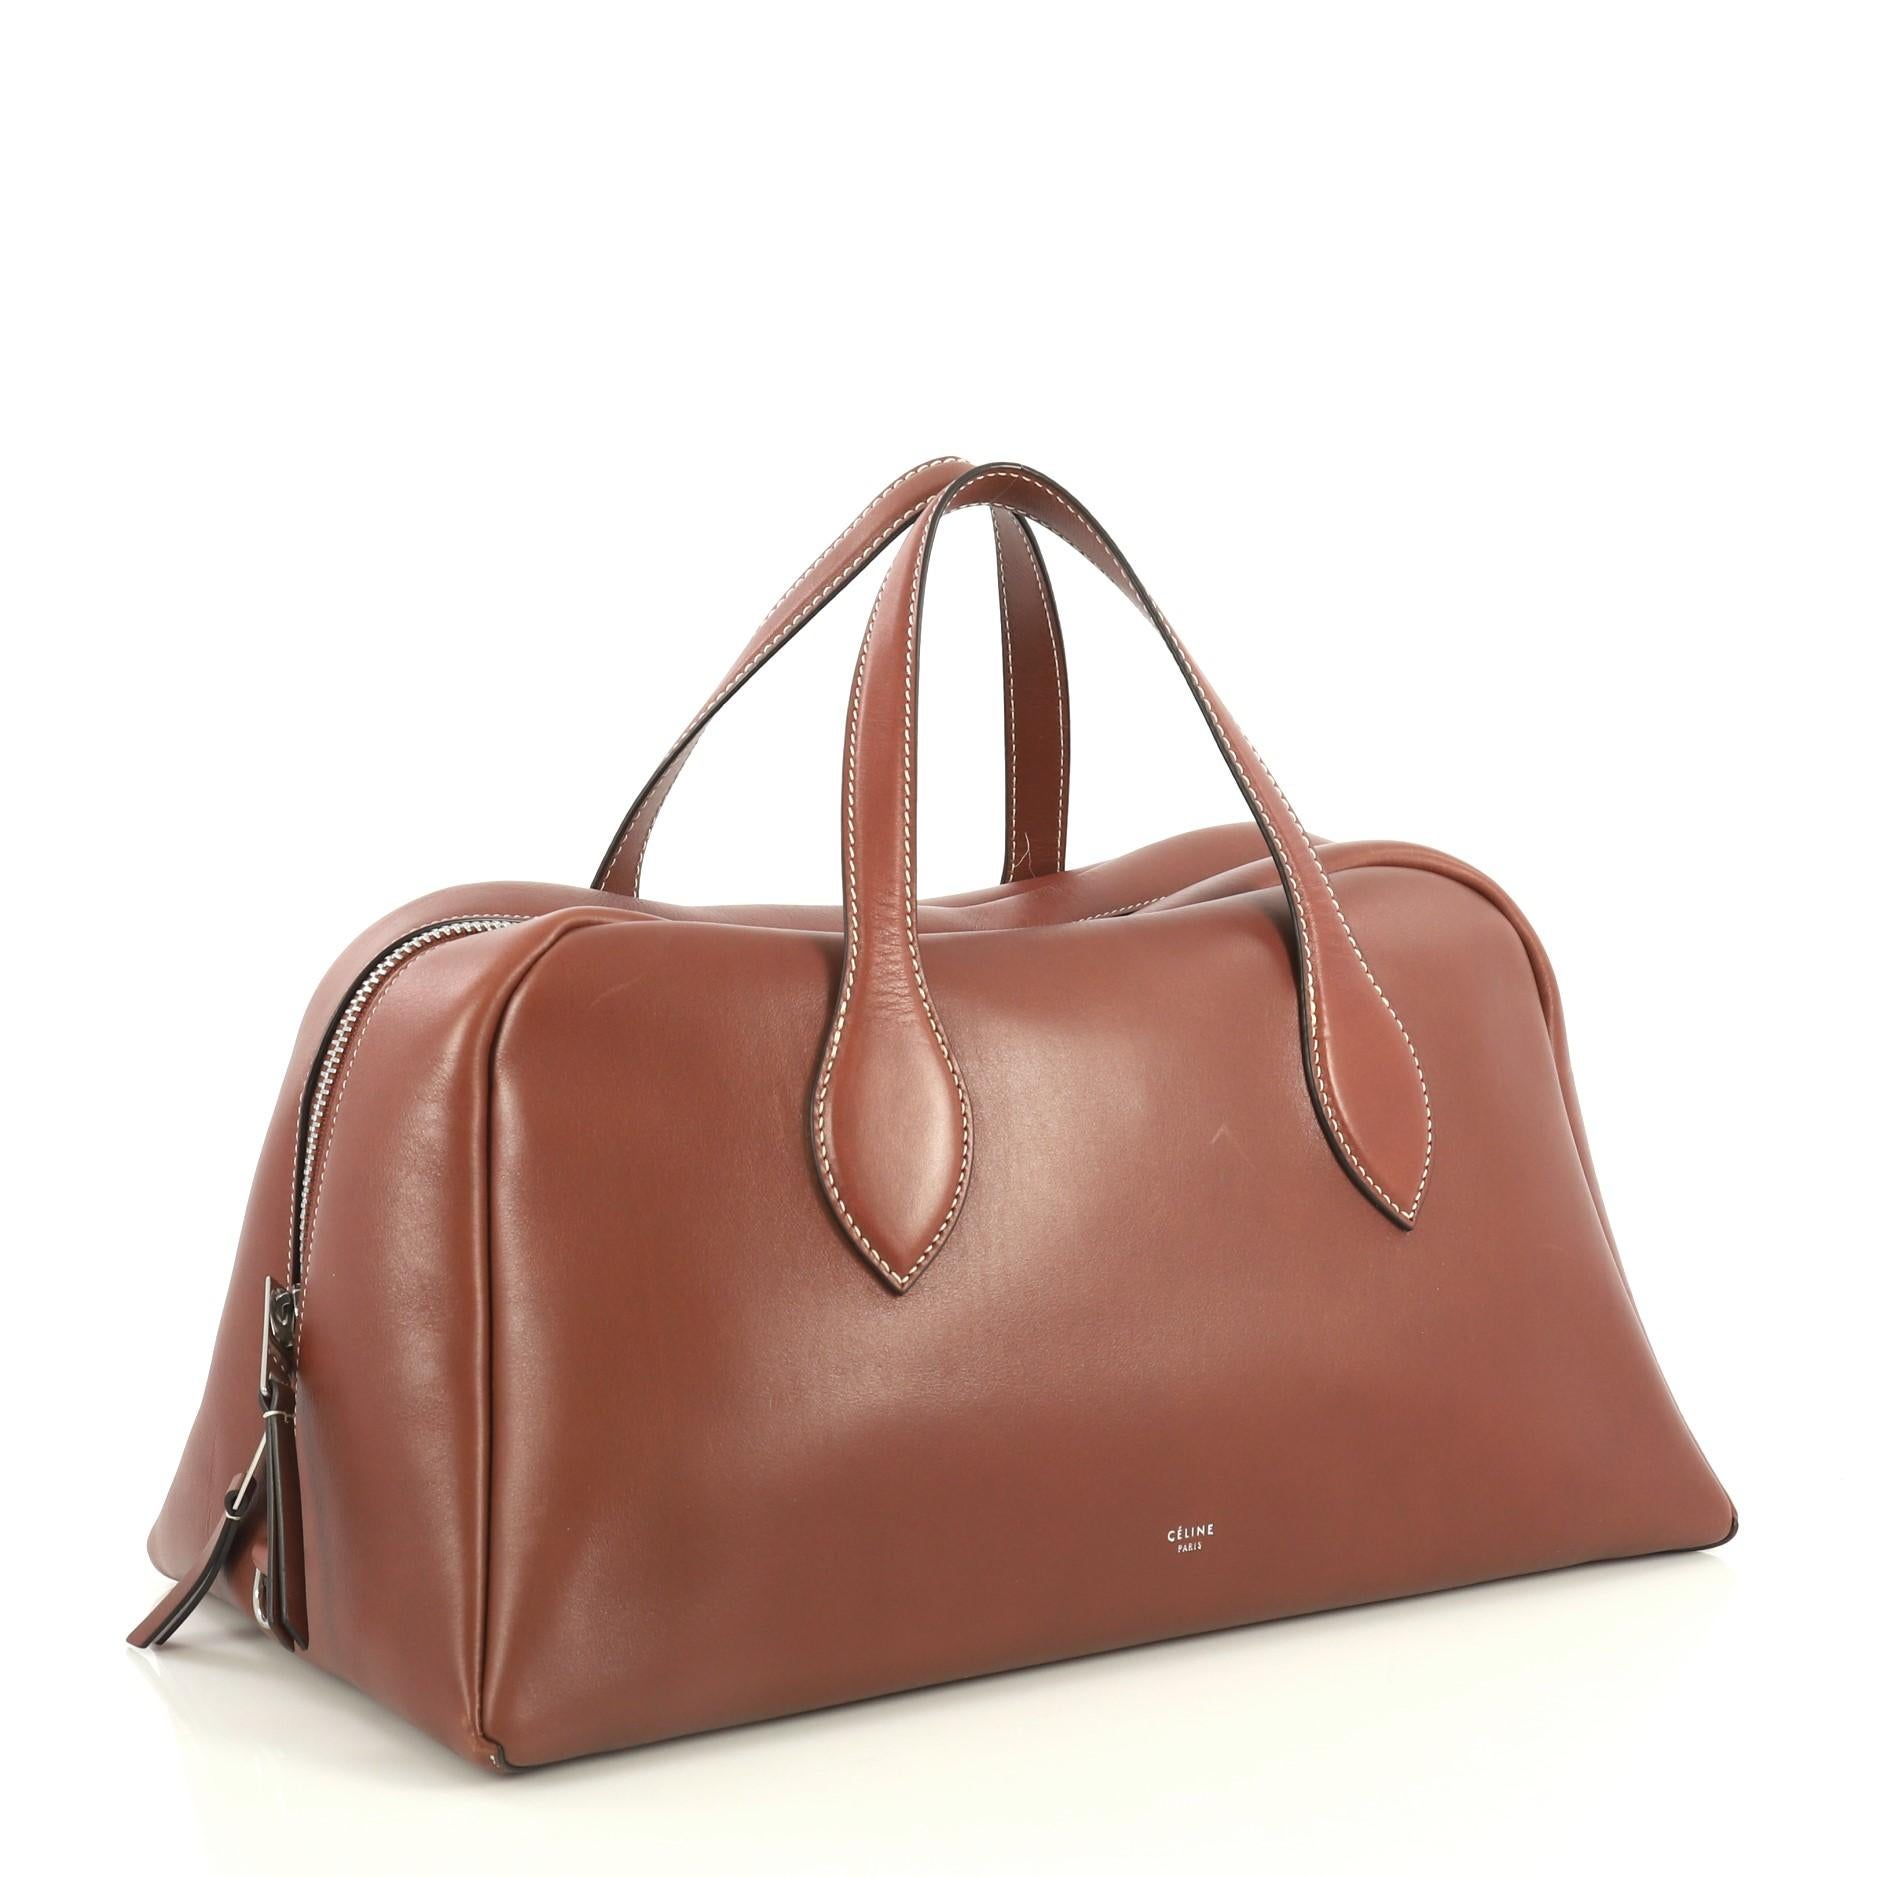 This Celine Bowling Bag Leather Large, crafted from brown leather, features dual flat leather handles and aged silver-tone hardware. Its zip closure opens to a brown suede interior with slip pockets. 

Estimated Retail Price: $3,400
Condition: